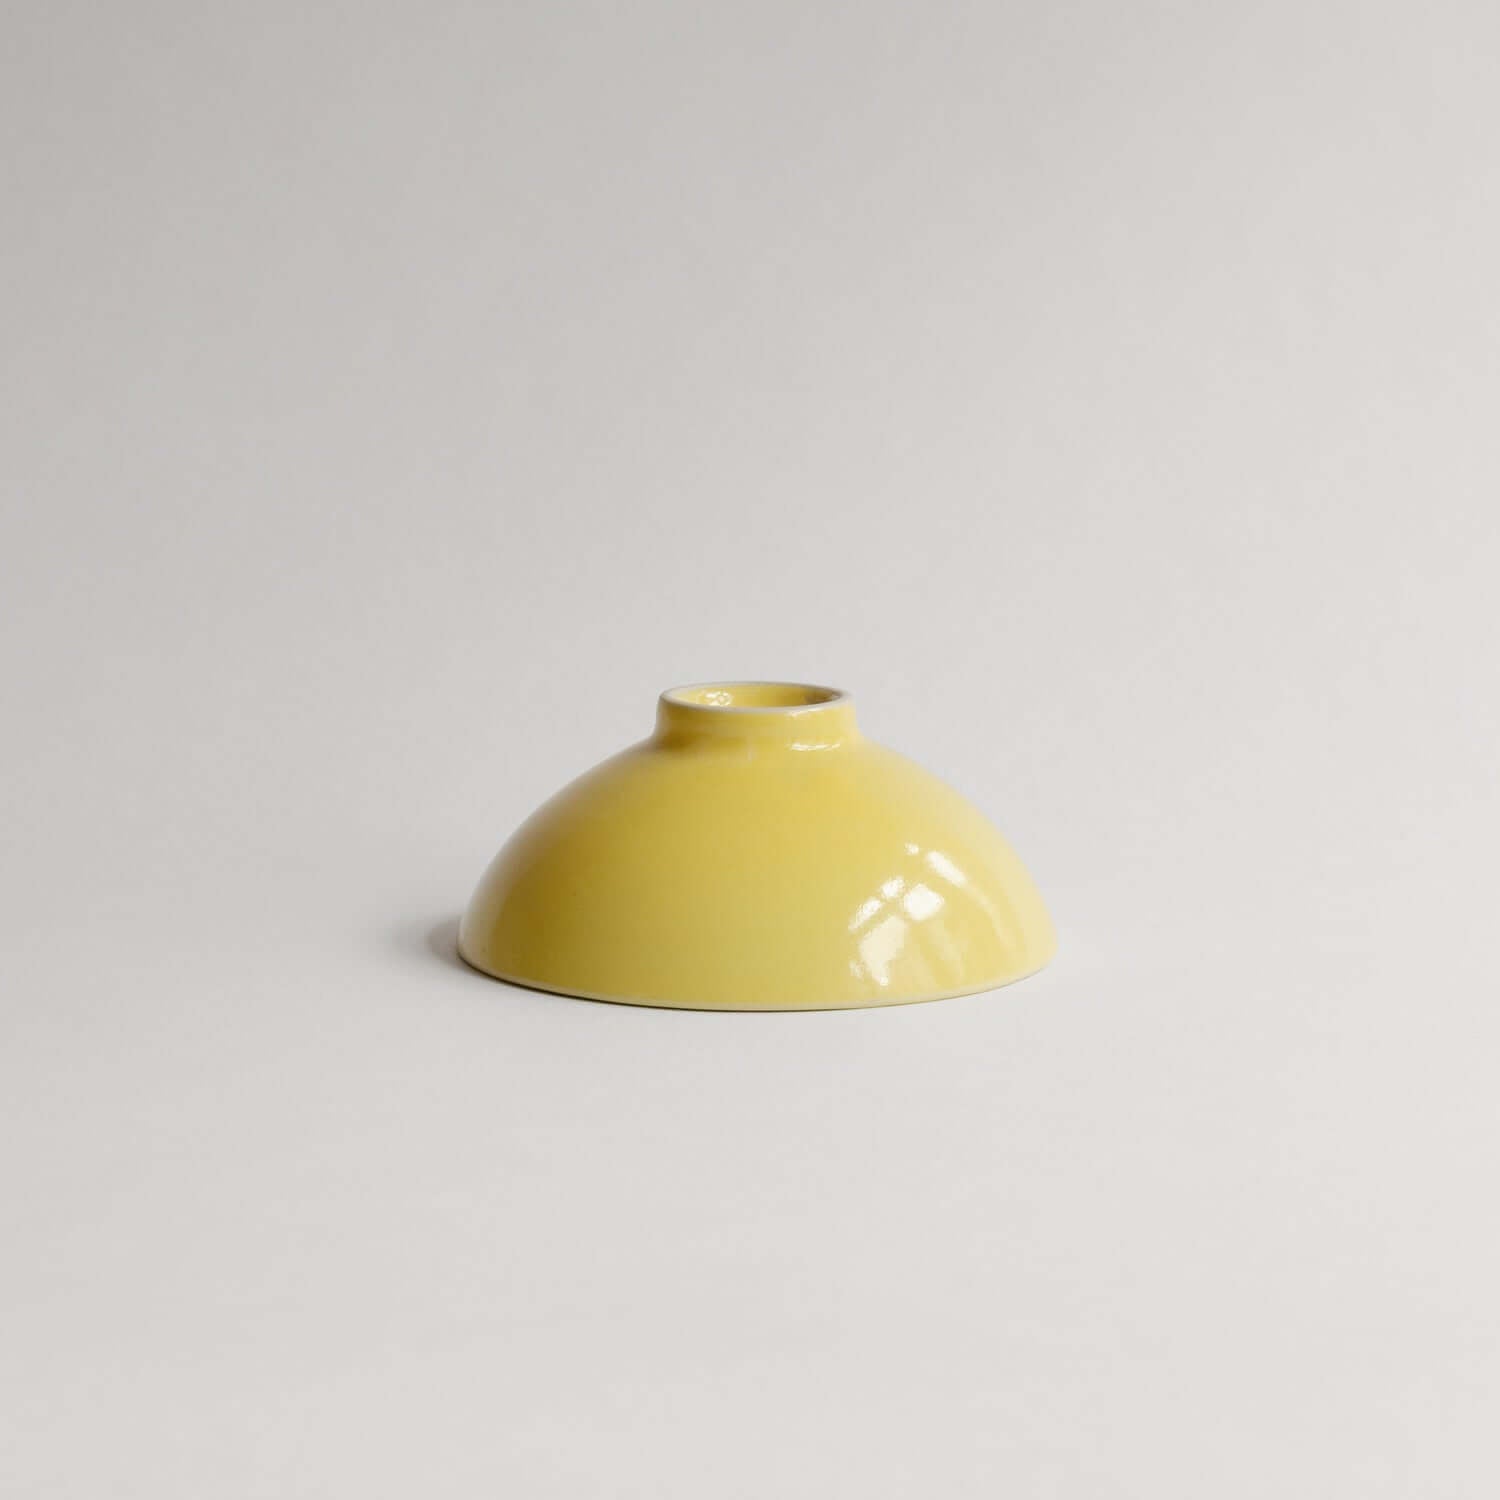 Shop our unique 13cm Yellow Bowl, handcrafted from grey stoneware with a yellow glaze. Each piece is a one-of-a-kind symbol of love from our studio. von viola beuscher ceramics